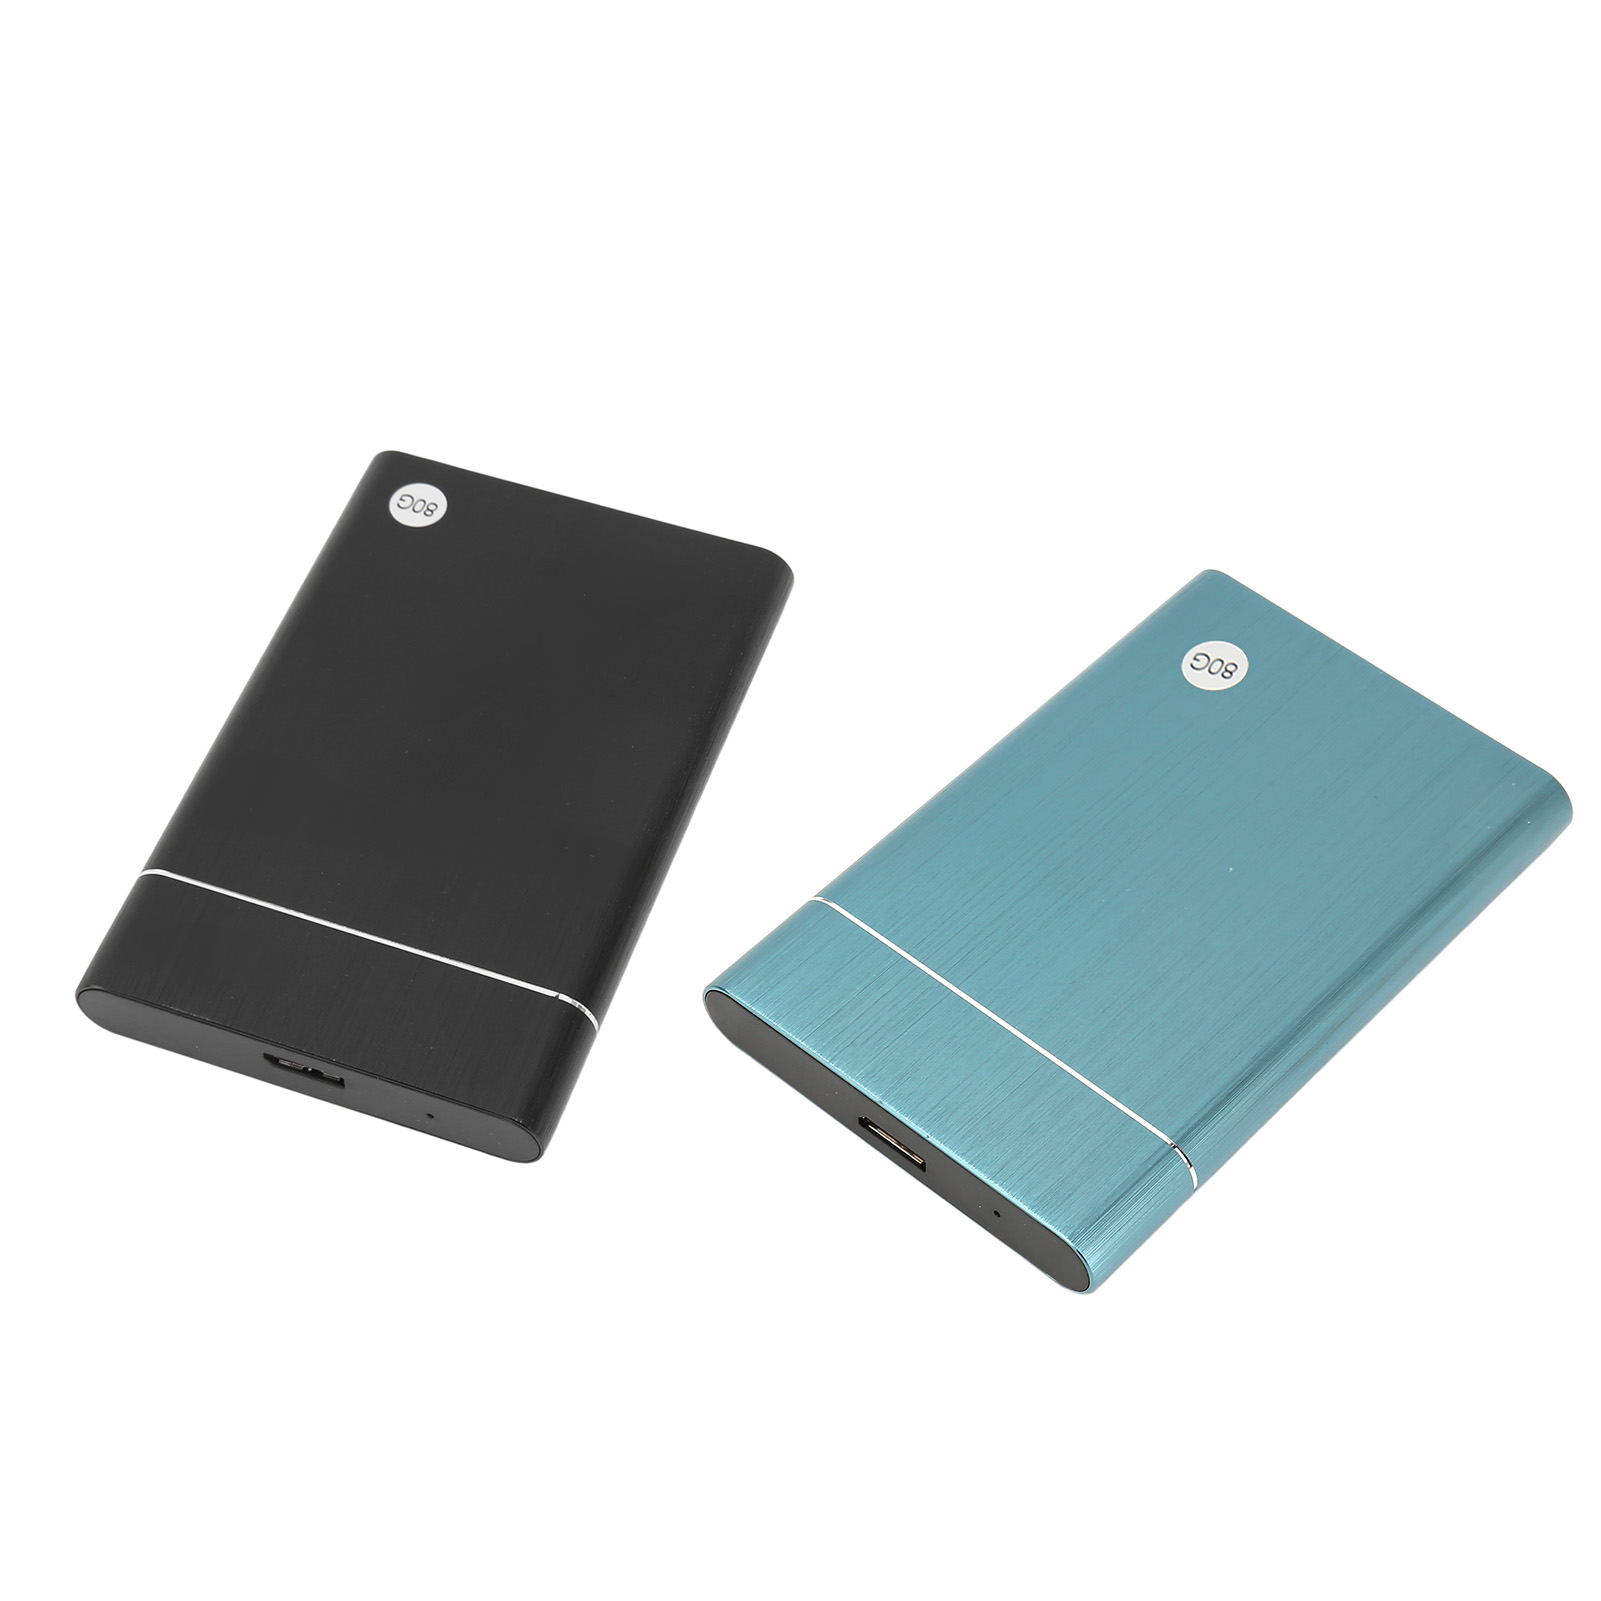 2.5in Ultra Slim External Hard Drive HDD Up To 5Gbps USB 3.0